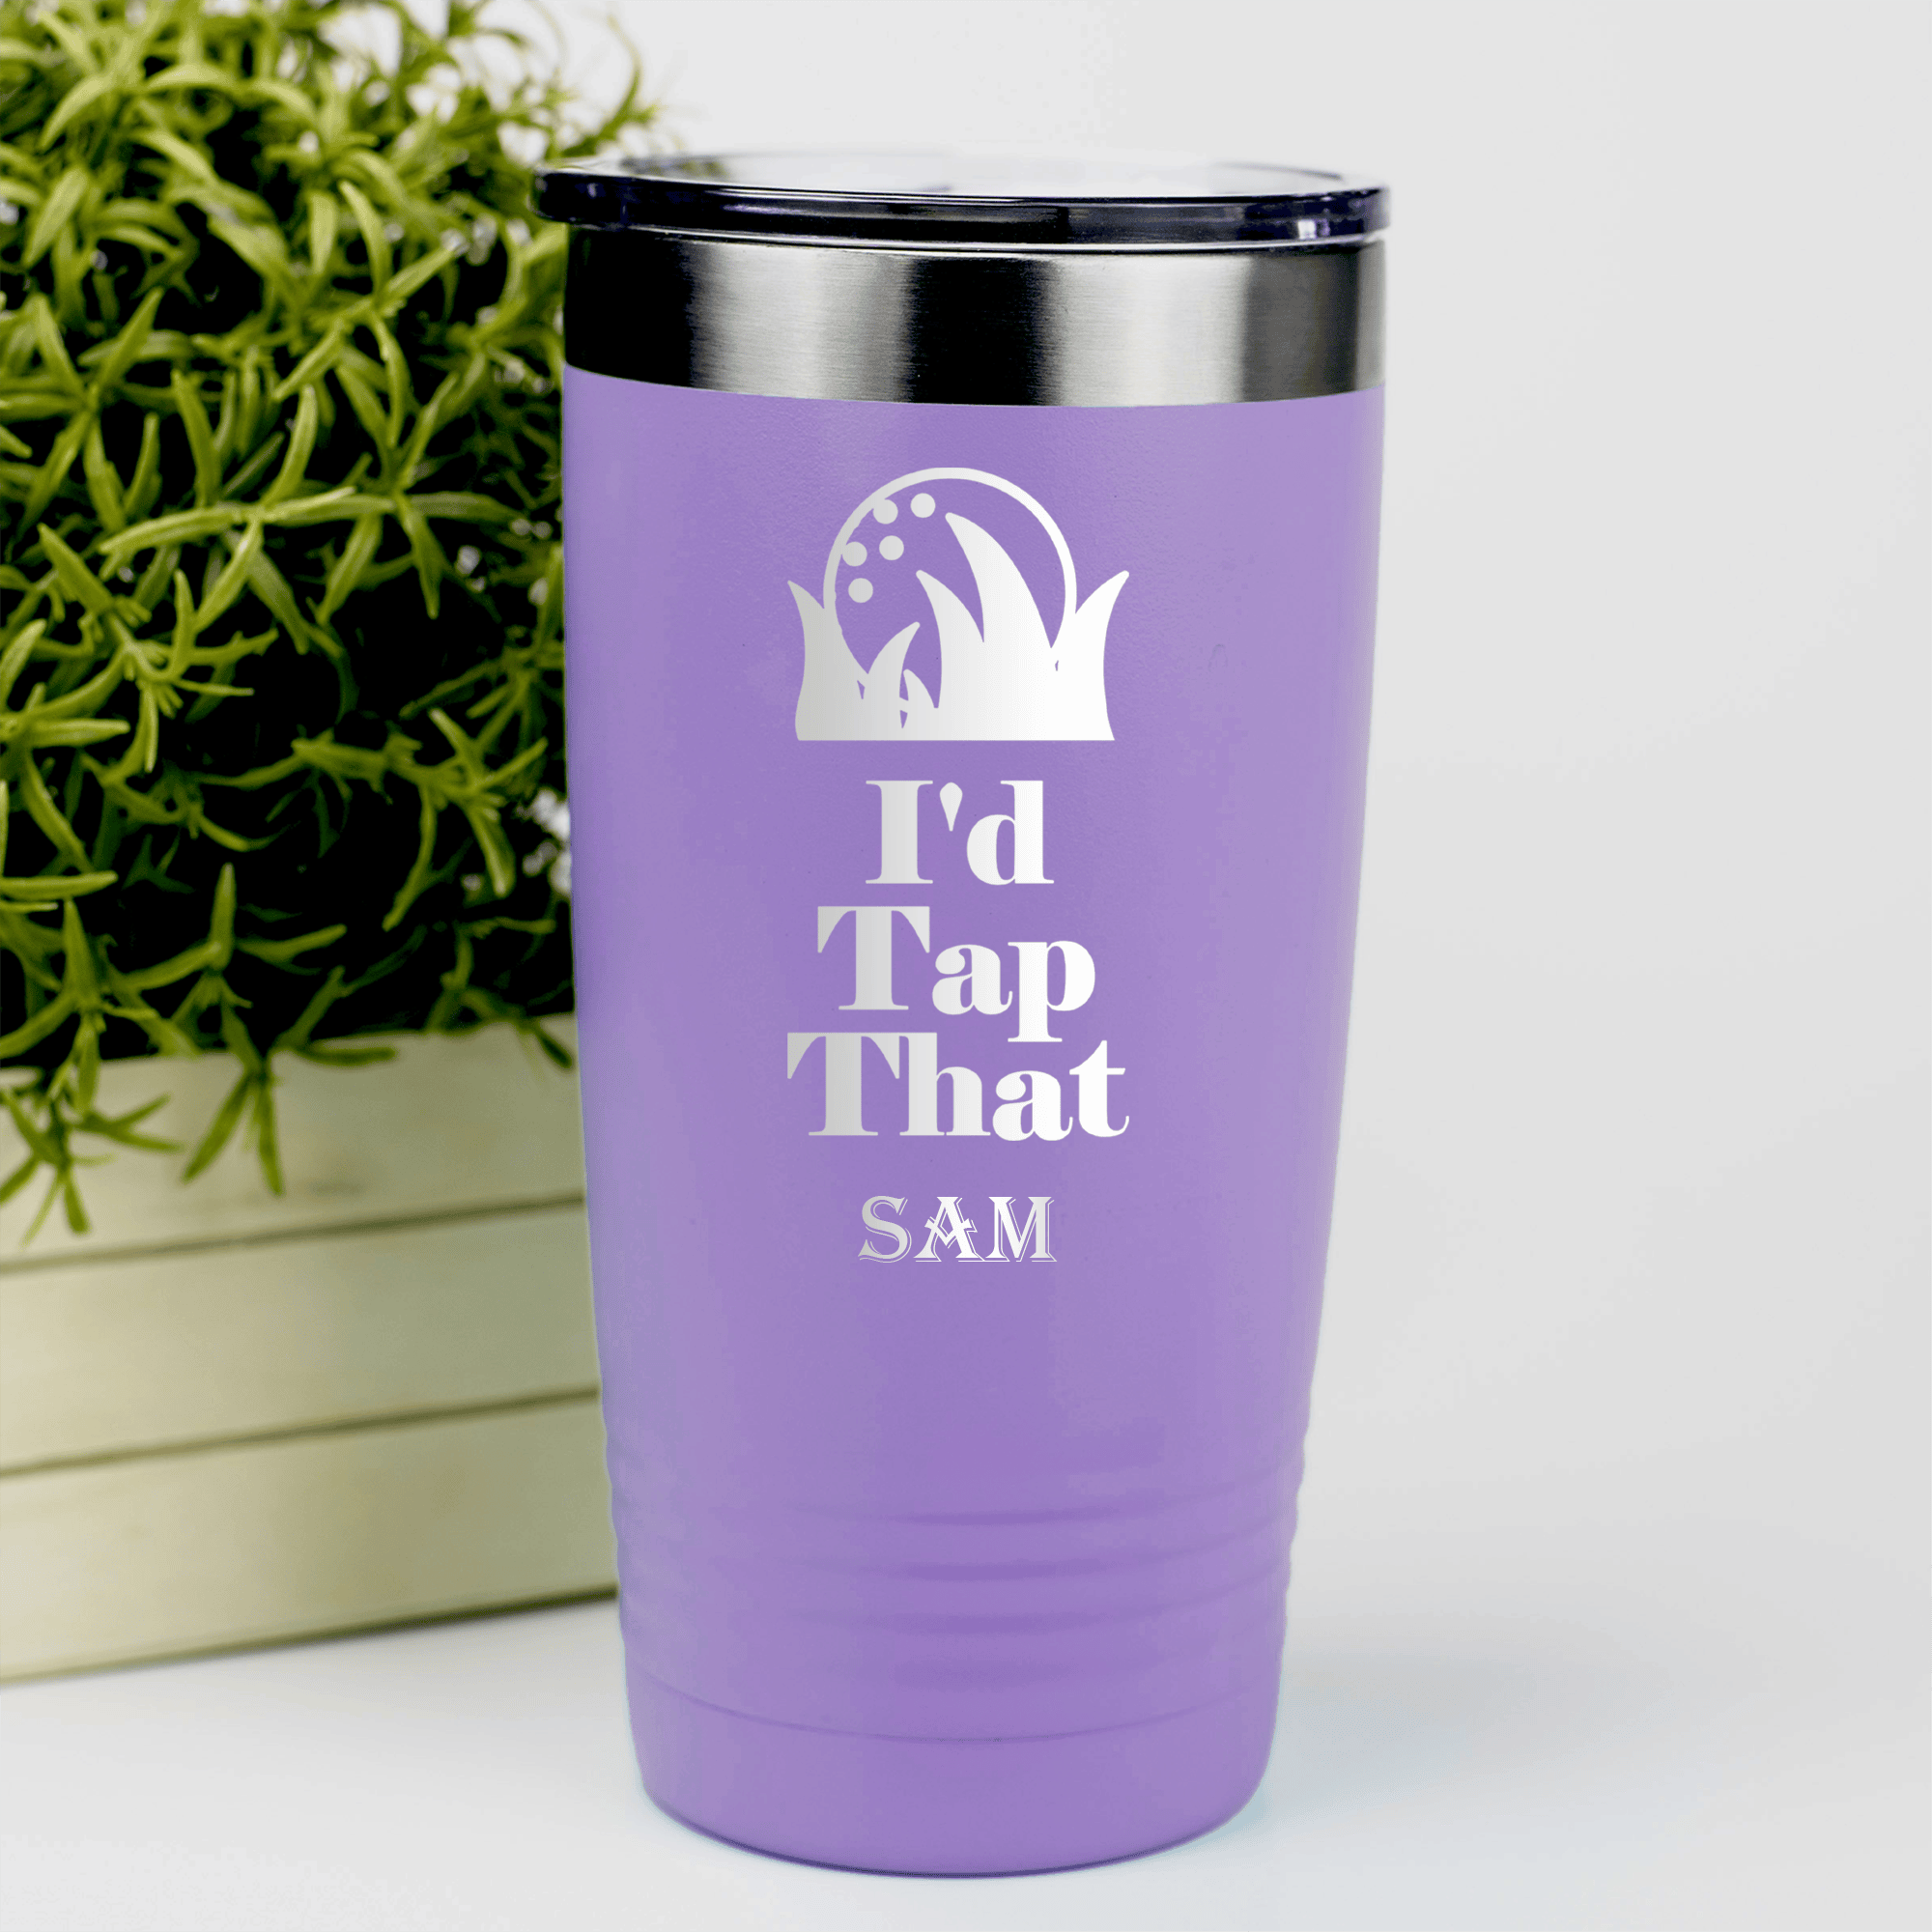 Light Purple Golf Tumbler With Id Tap That Design